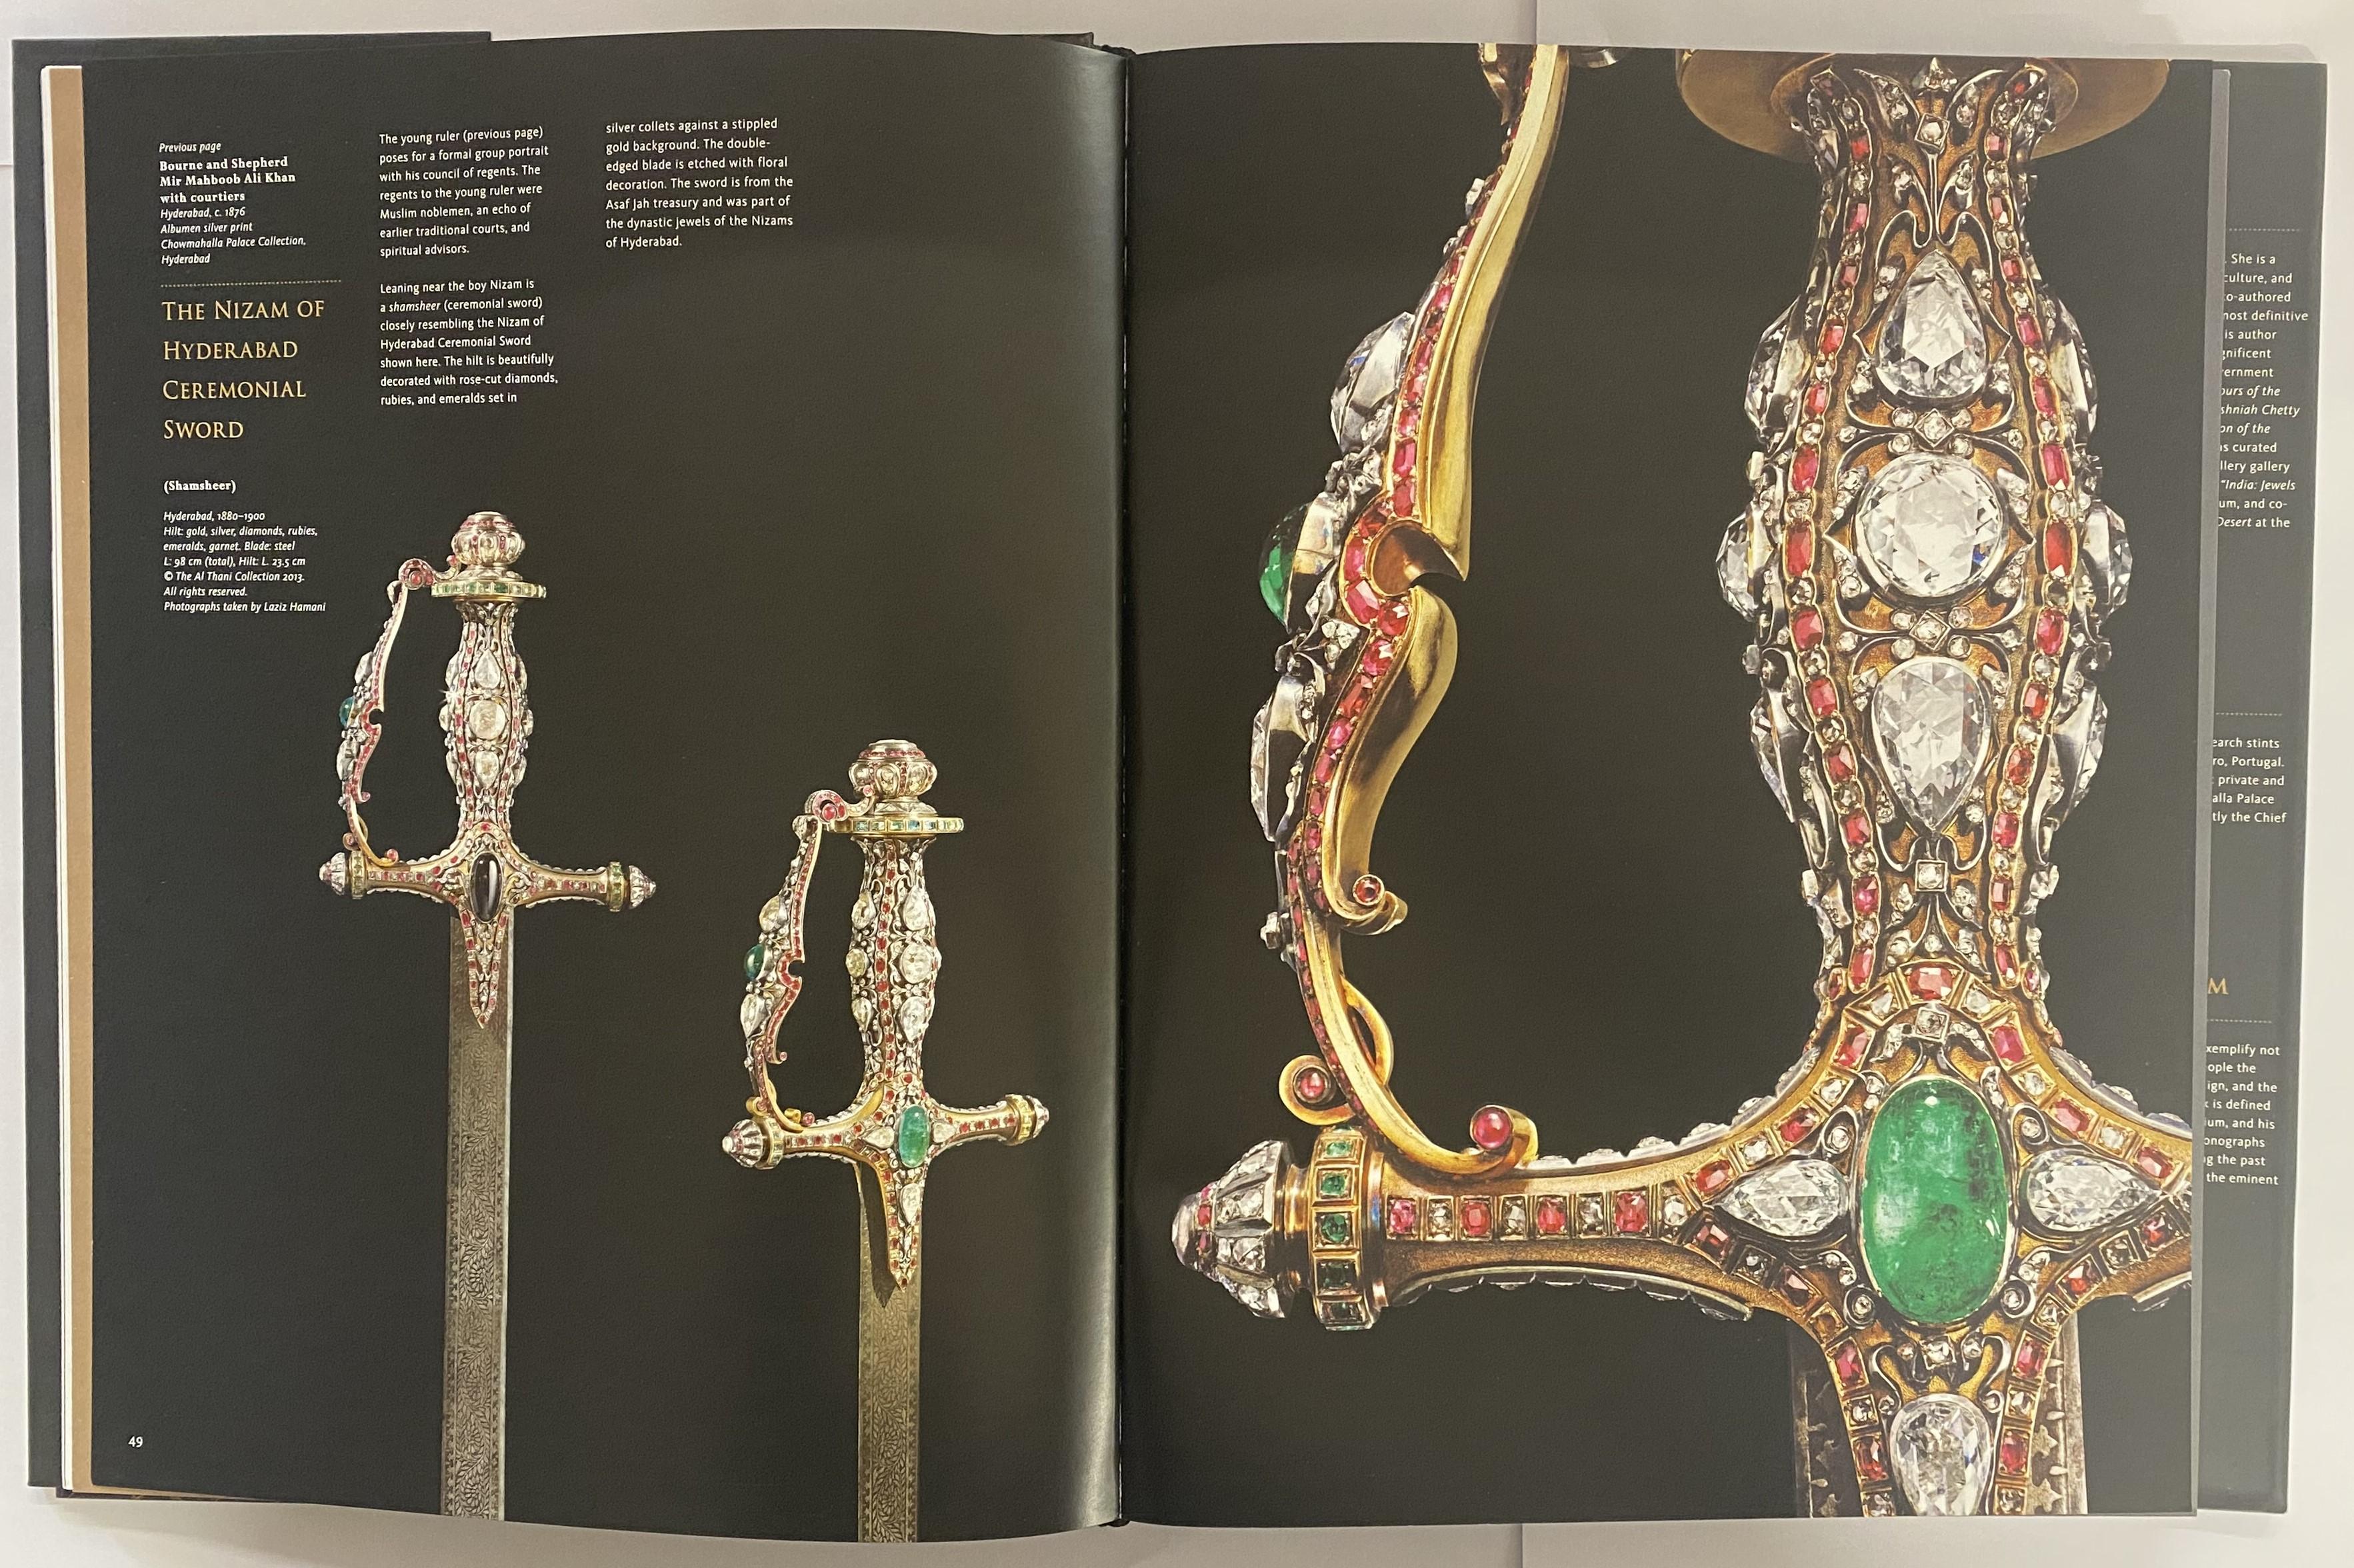 Treasures of the Deccan: Jewels of the Nizams & Painted Visions is a two volume set devoted retrospectively to the fabulous jewels of the Nizams of Hyderabad, and a seminal collection of paintings that established the rich visual heritage of the